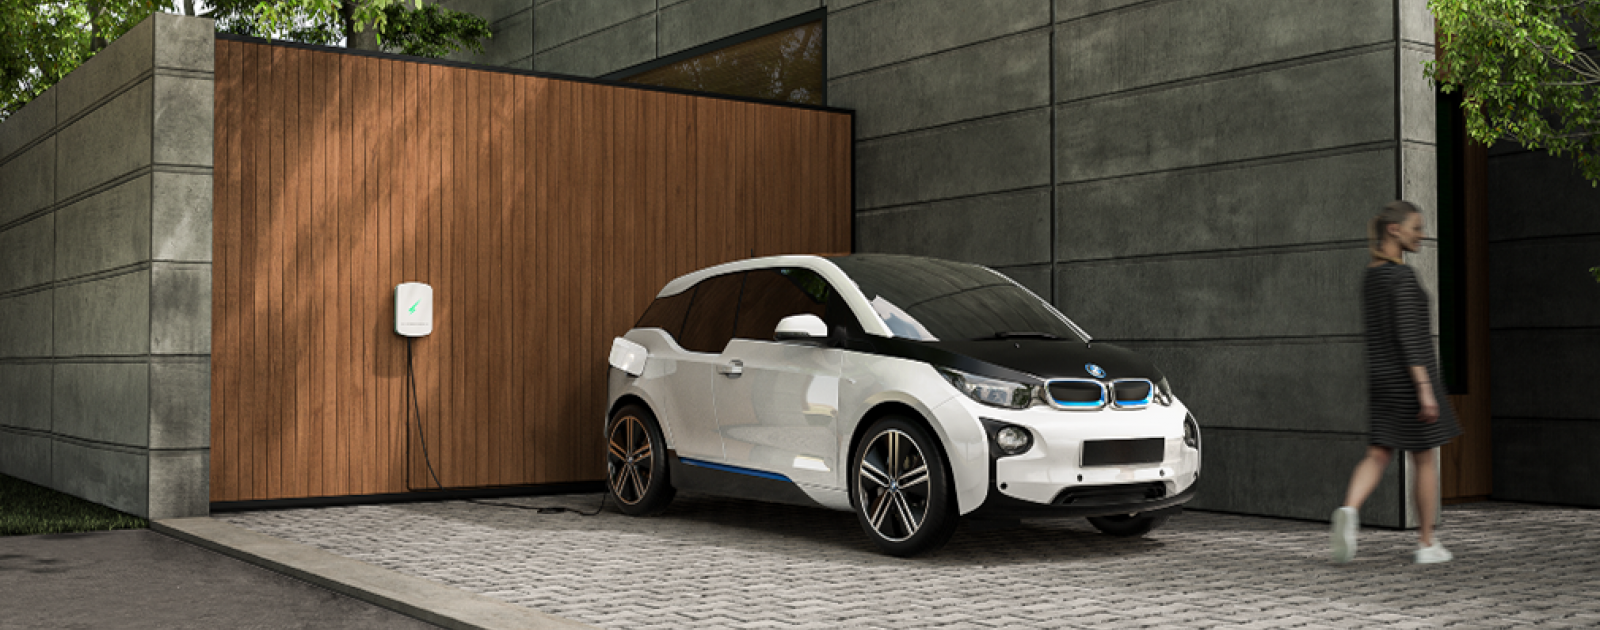 iDACS Install Home EV Chargers across the UK